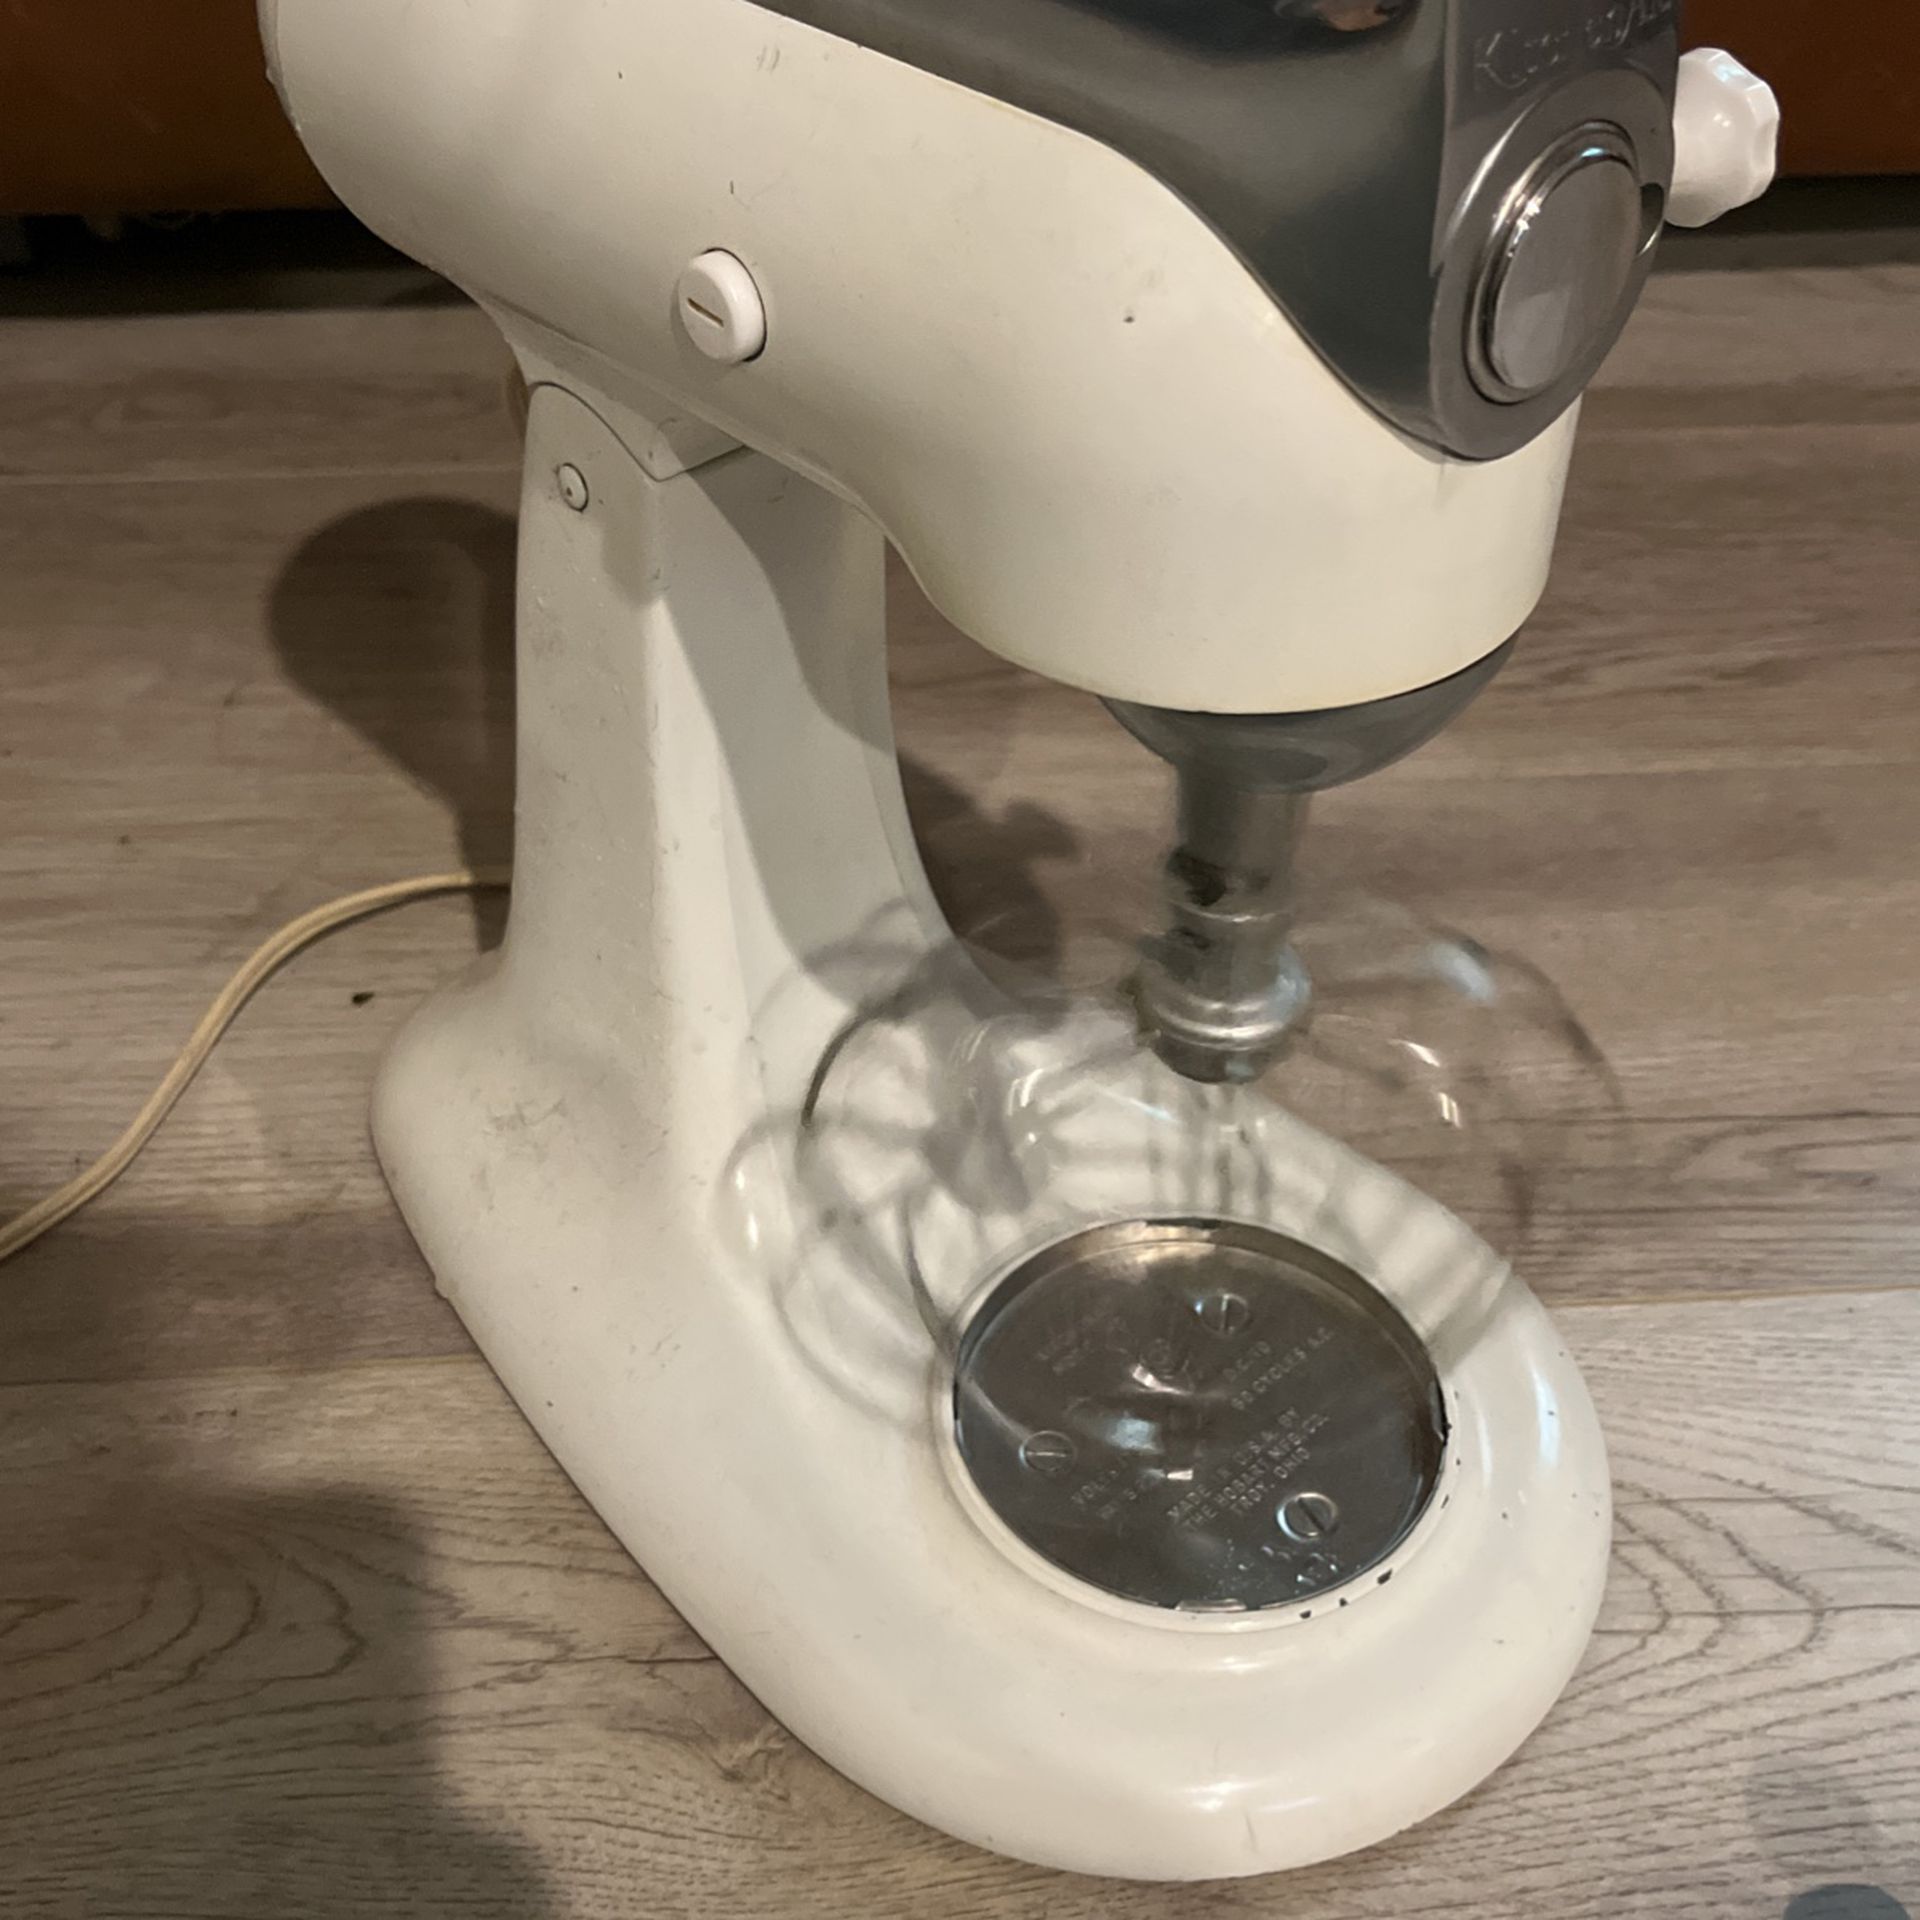 KitchenAid Classic Series 4.5 Qt. Stand Mixer With Tilt-Head Onyx Black for  Sale in Modesto, CA - OfferUp